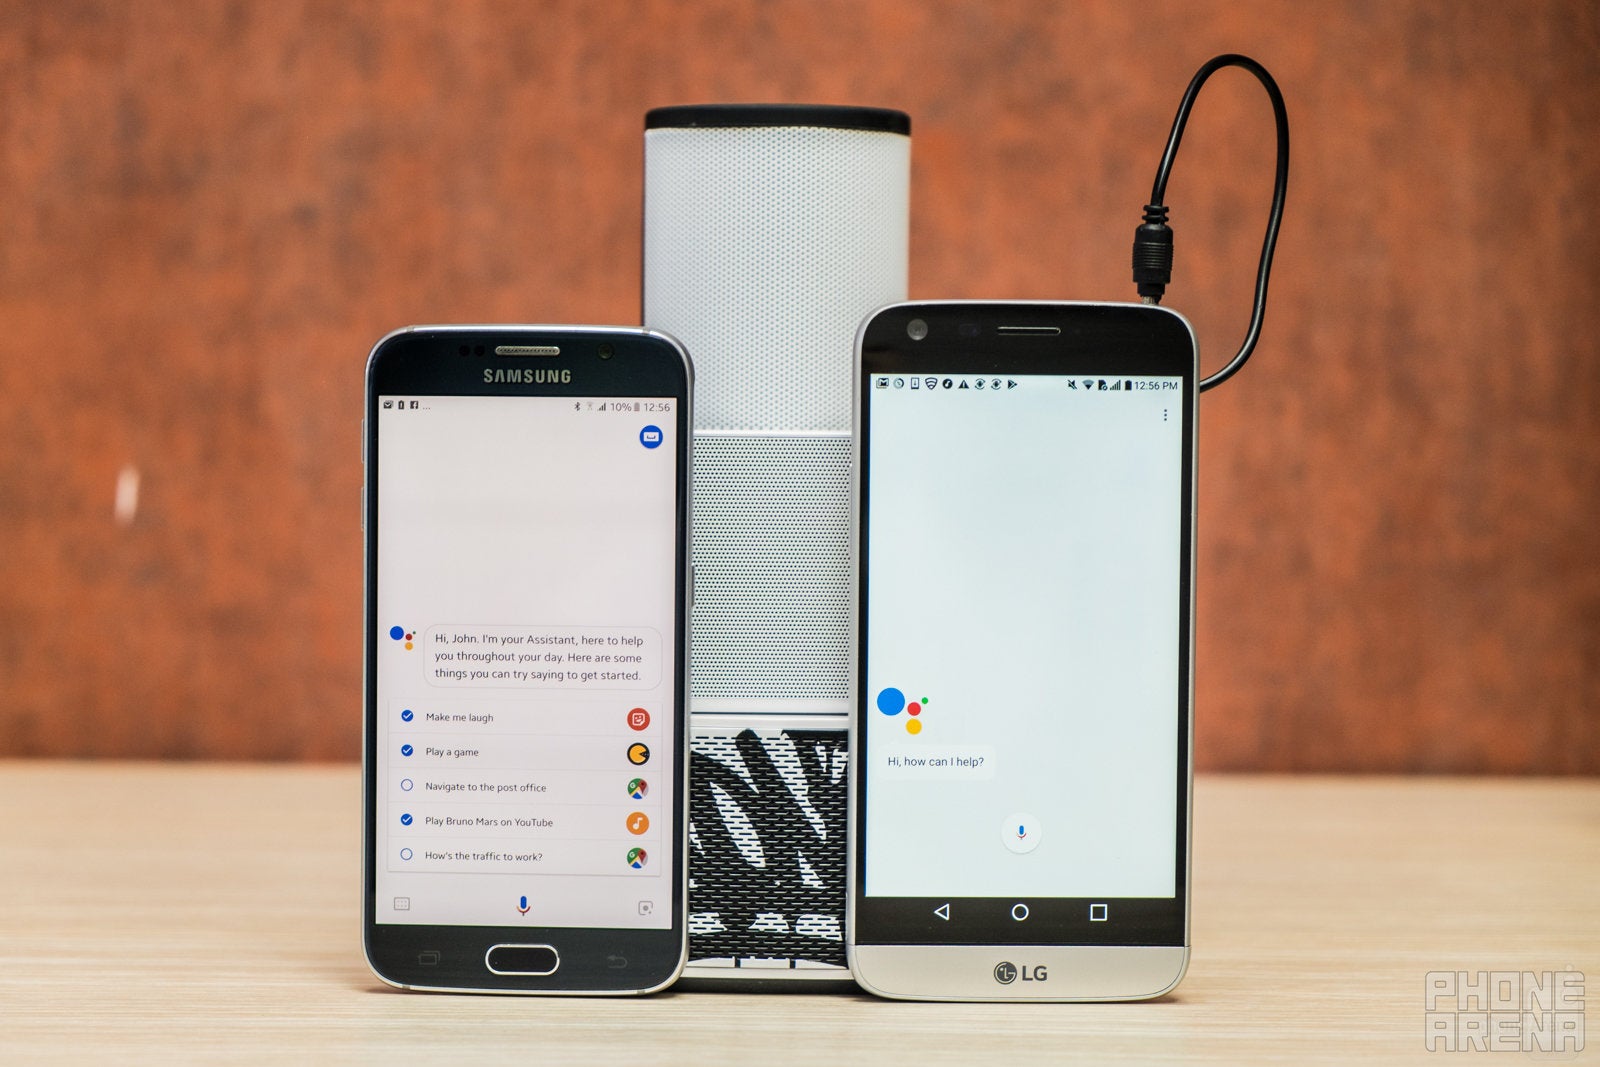 Turn a spare Android phone into a Google Home - CNET